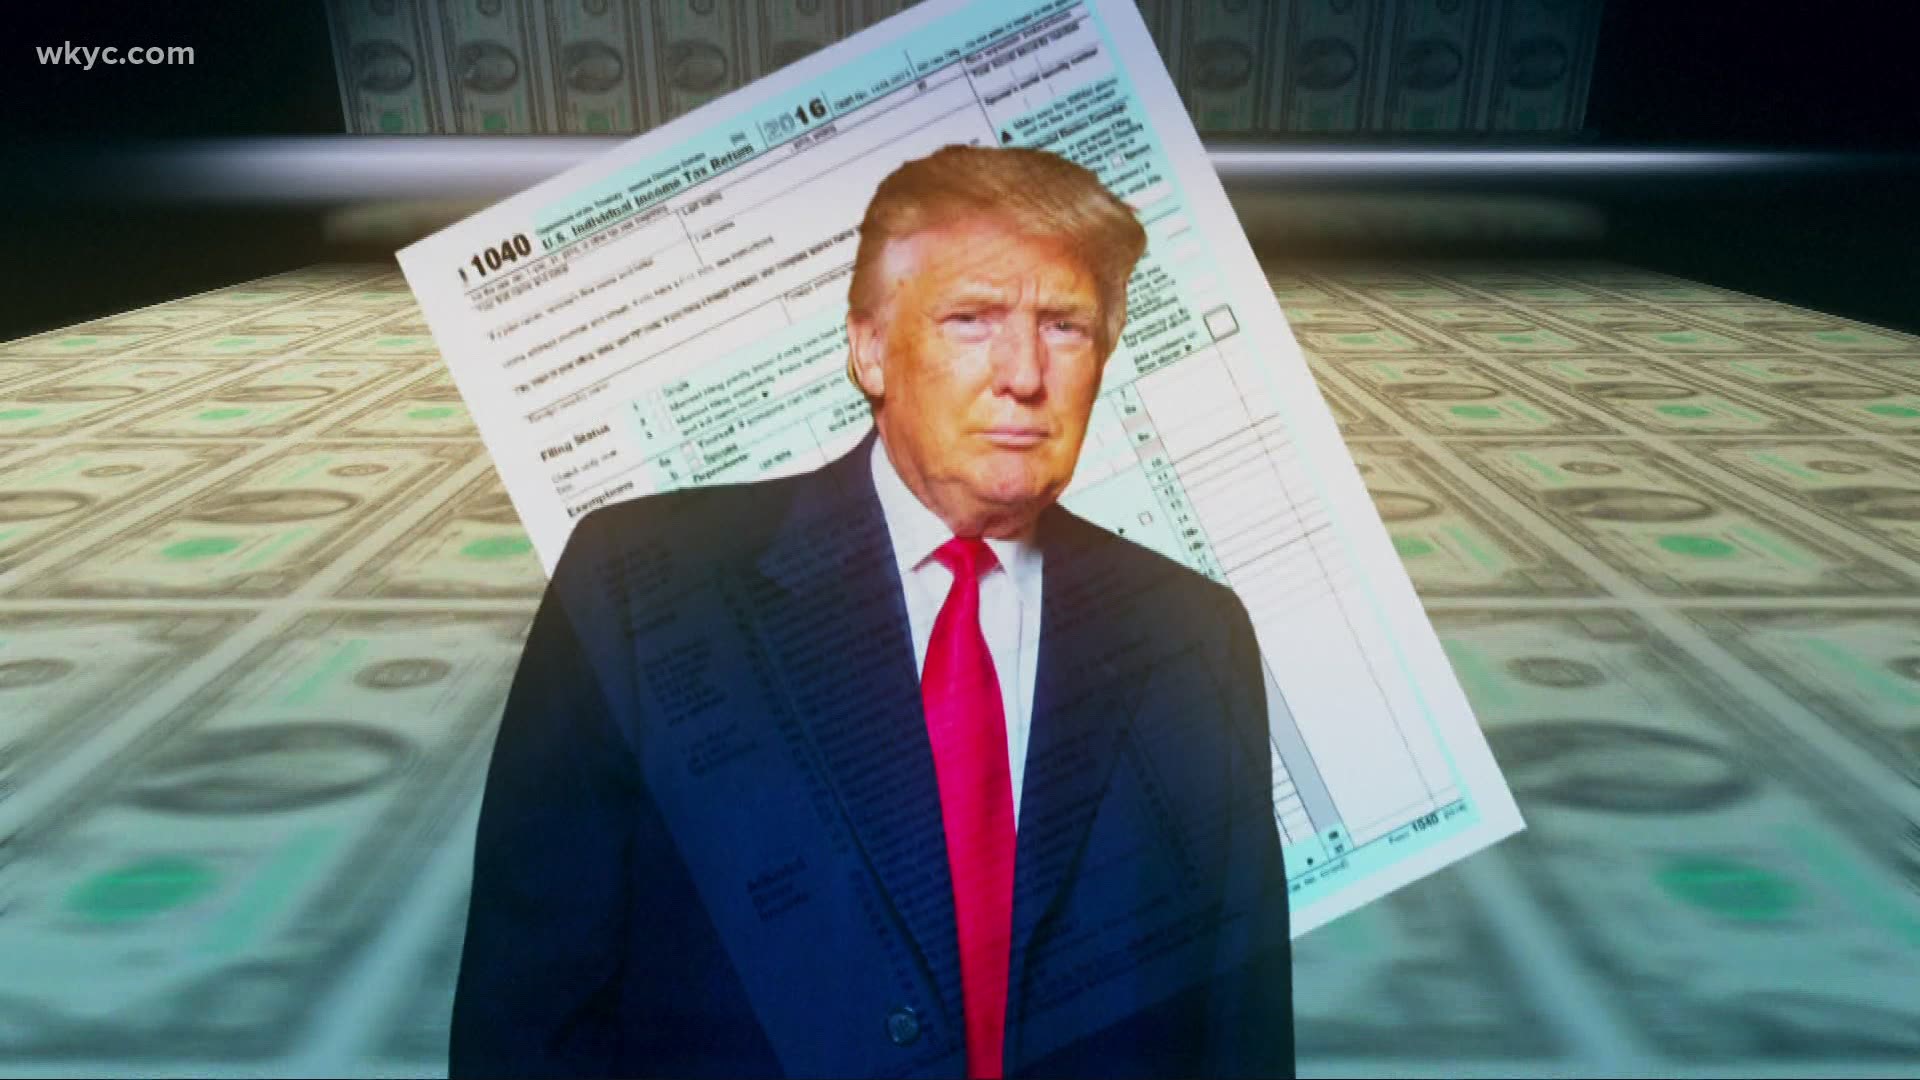 The paper says Trump didn't pay federal taxes for ten of the past 15 years.  Trump also only paid 750 dollars the year he was elected President.